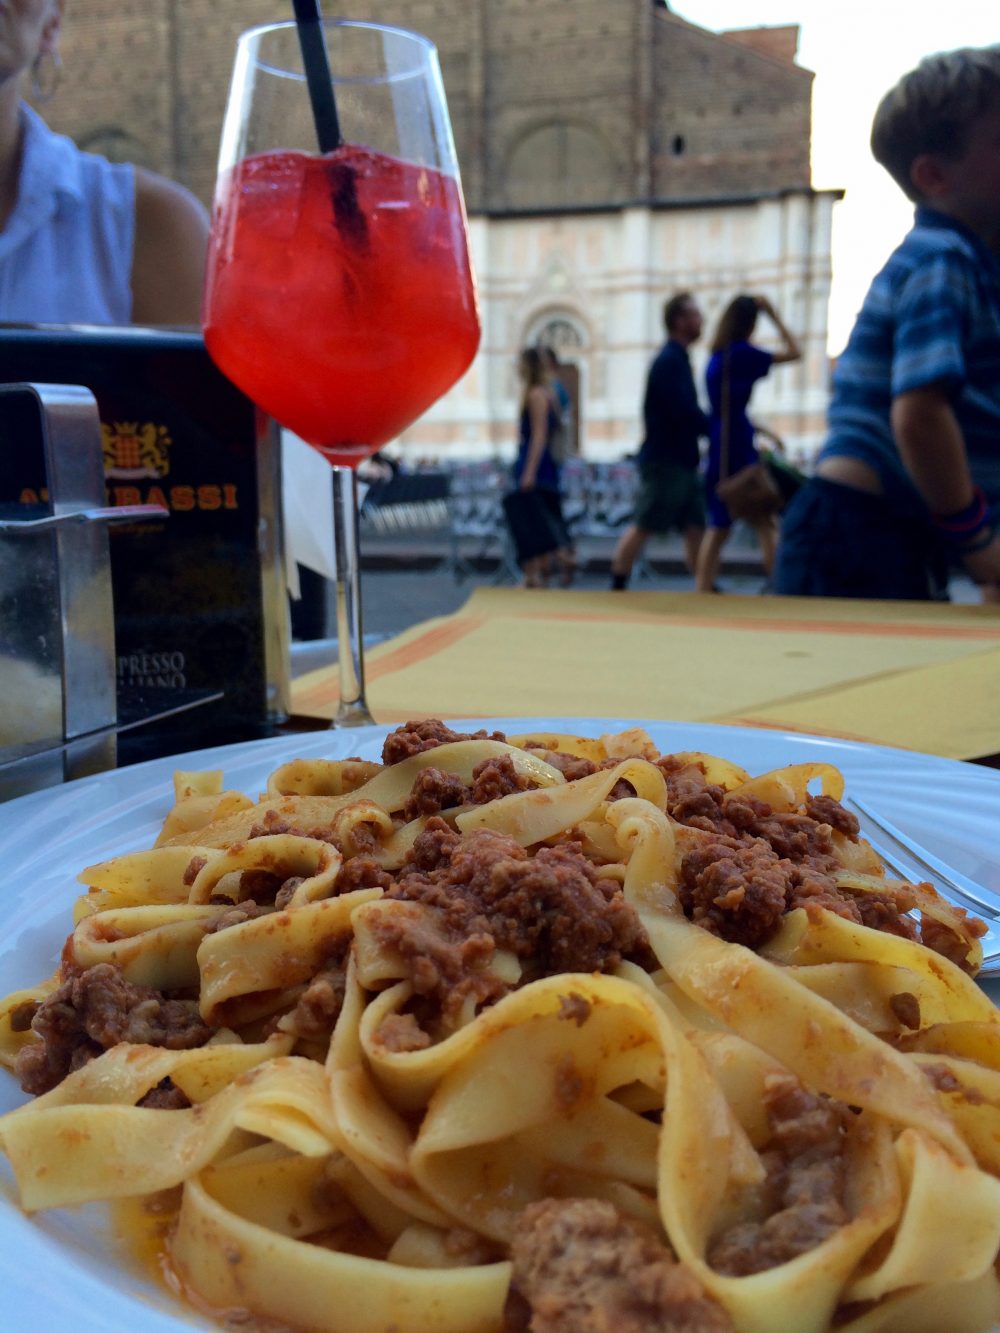 A delicious meal during a layover in Bologna